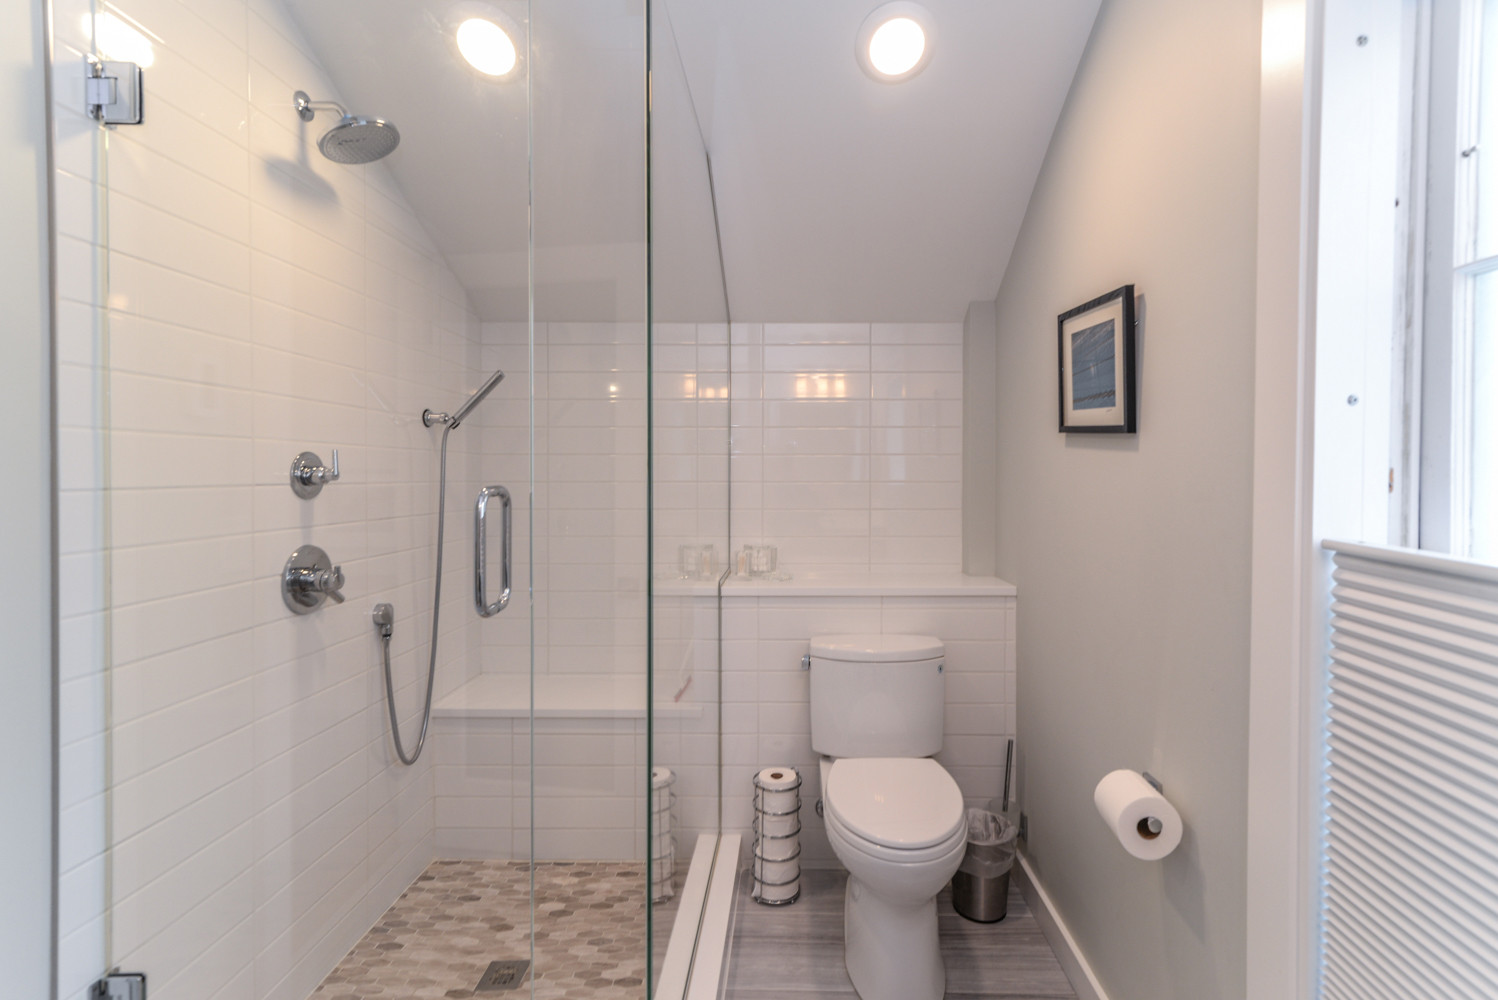 The loft bathroom packs a lot in to a smaller space. The wall tile runs the length of the bathroom to create a larger appearance, plumbing is hidden in a shelf/ledge created with a waterfall edge of q